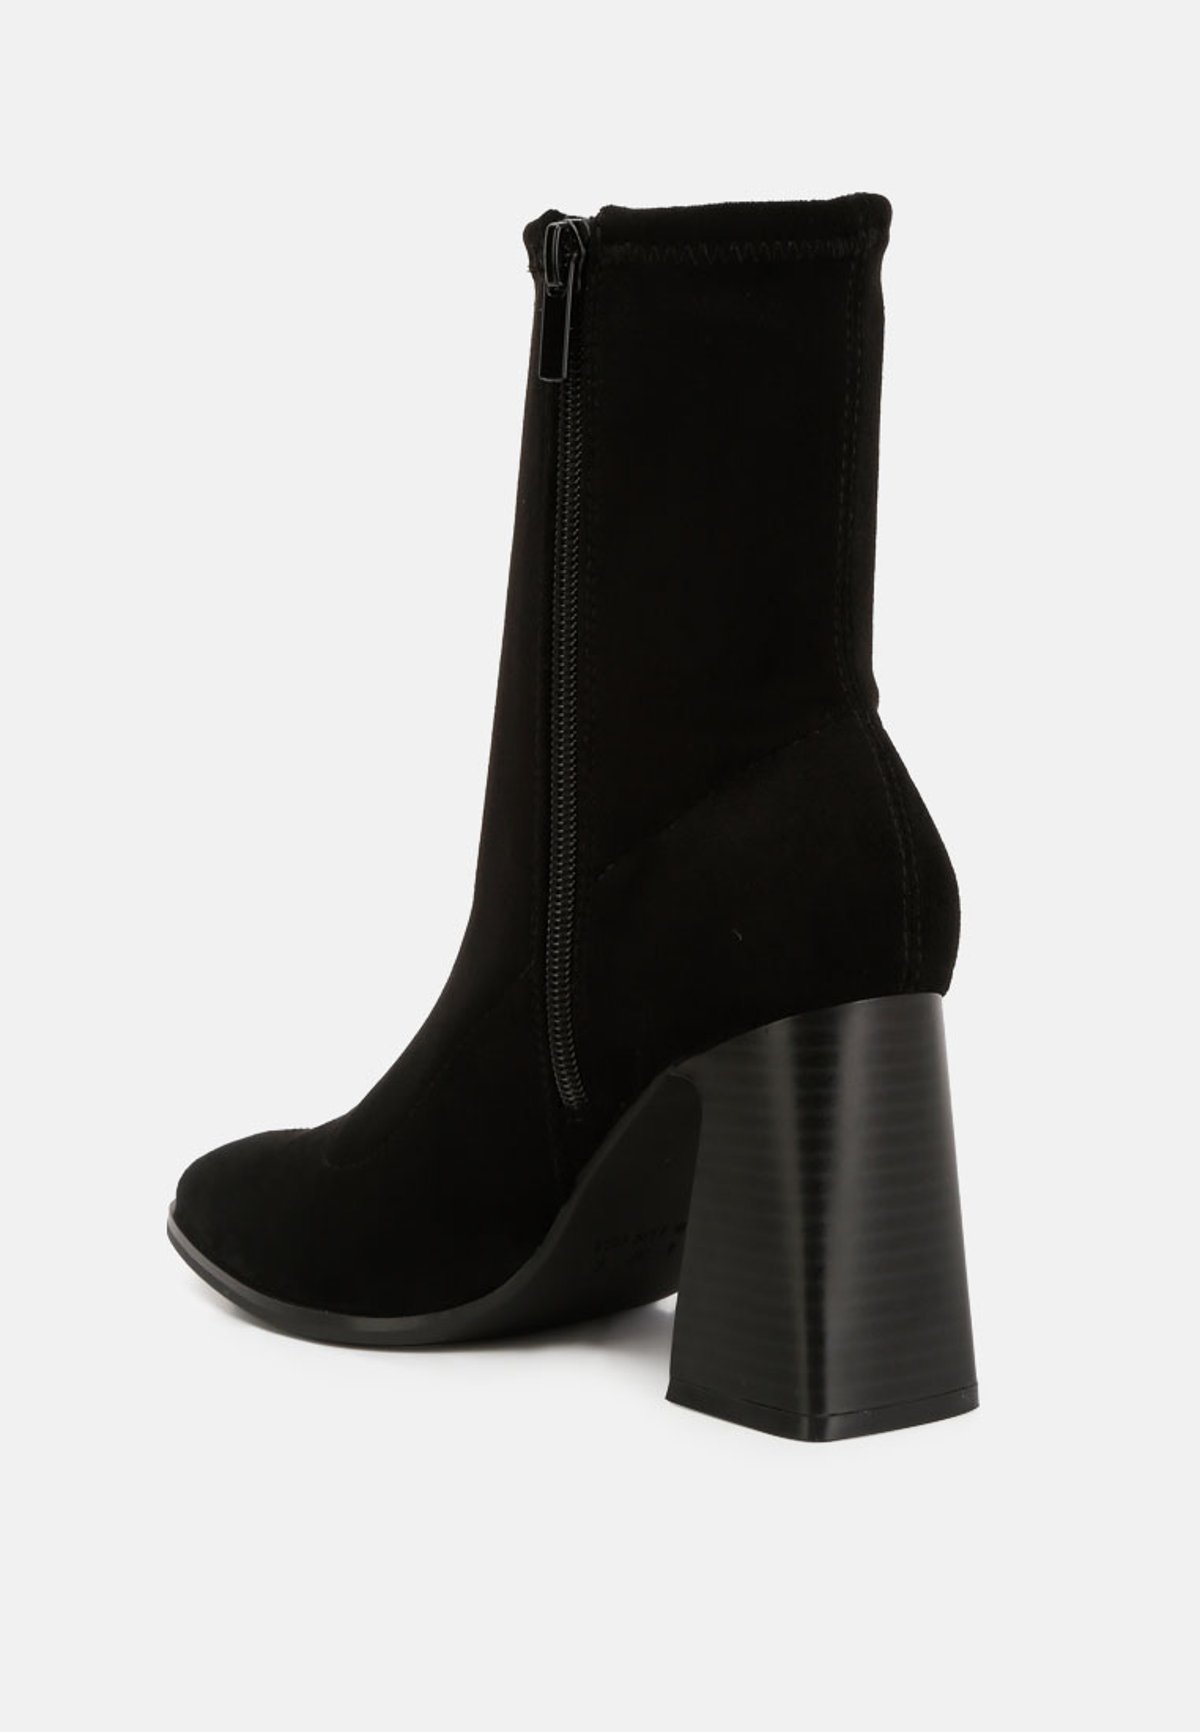 Flared Block Heel High Ankle Boots